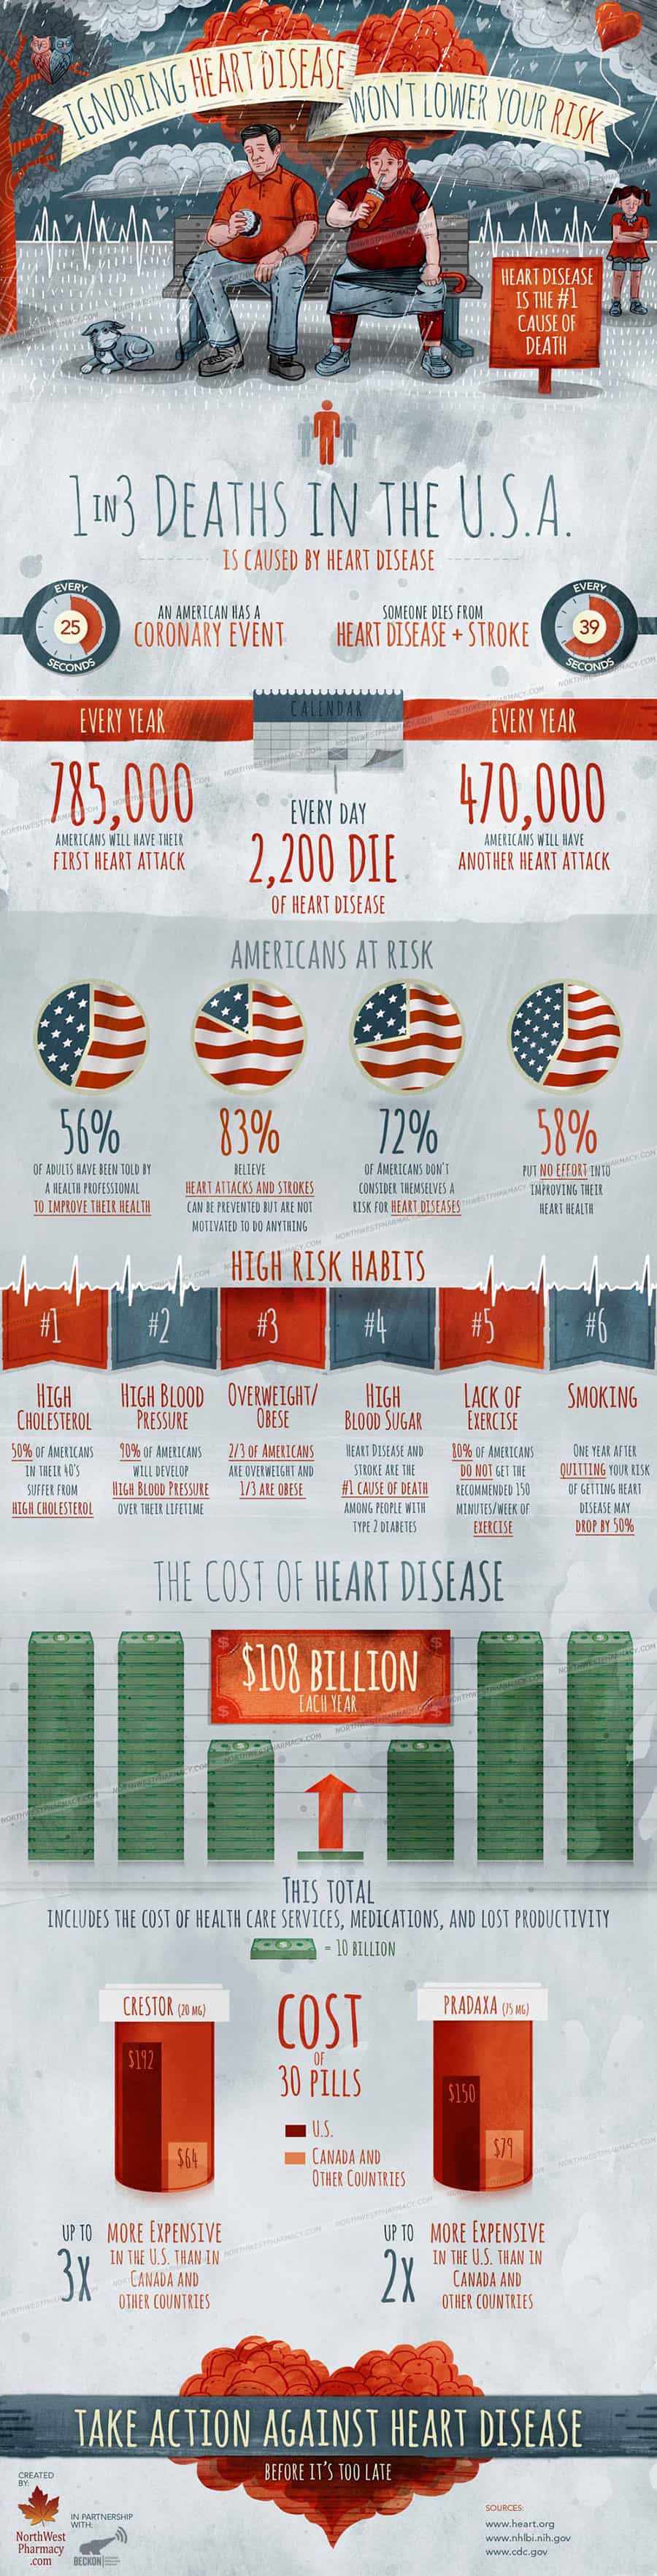 An infographic explaining the prevalence of heart disease in the US.